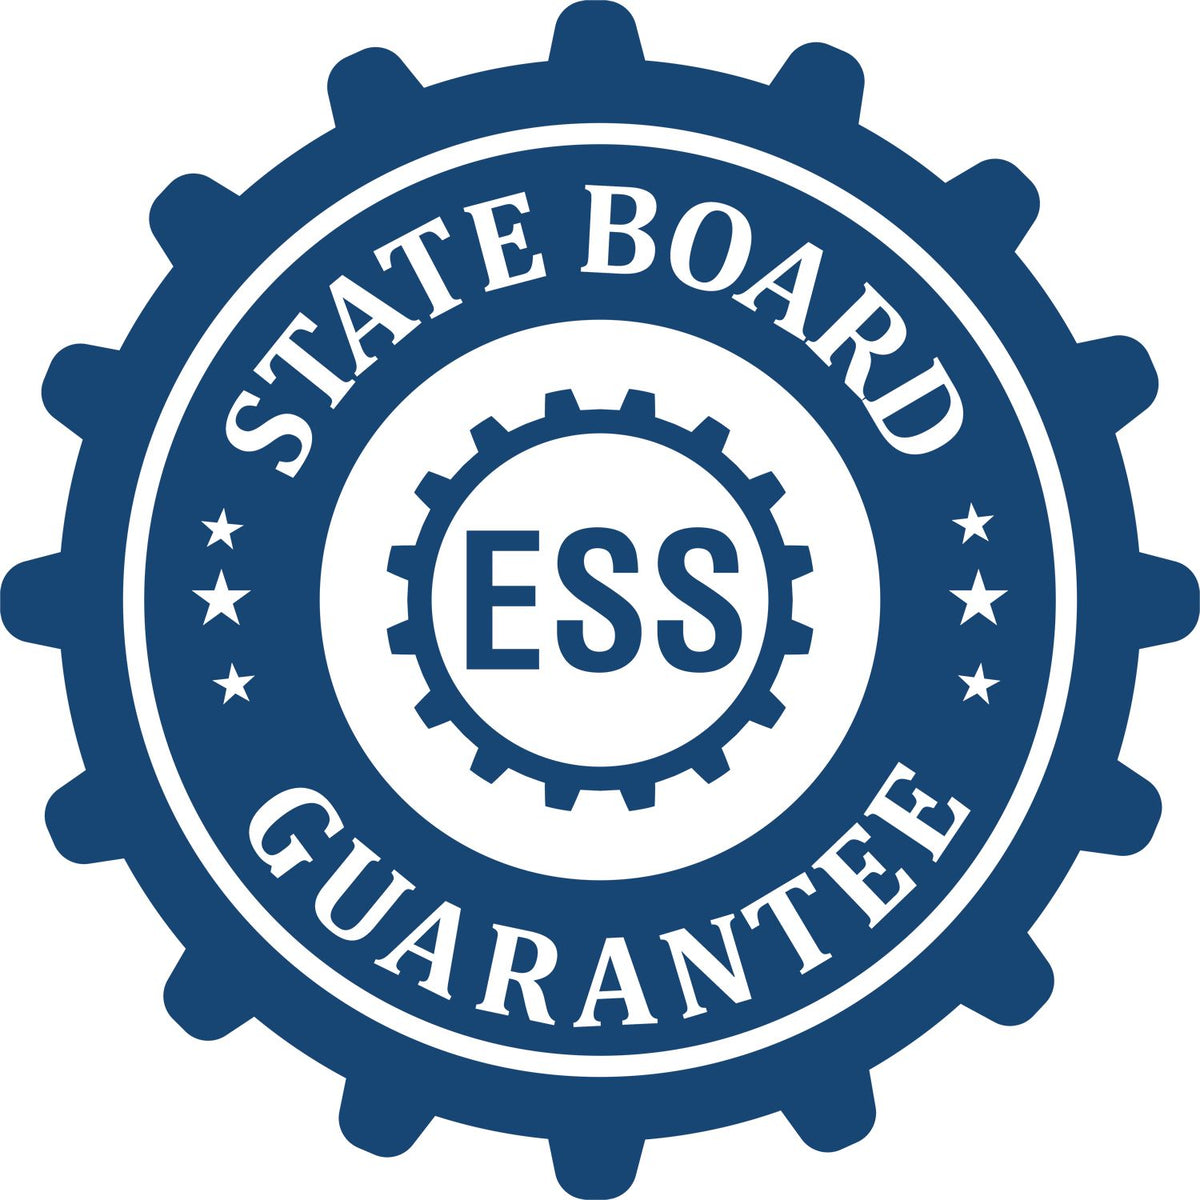 An emblem in a gear shape illustrating a state board guarantee for the Hybrid Utah Architect Seal